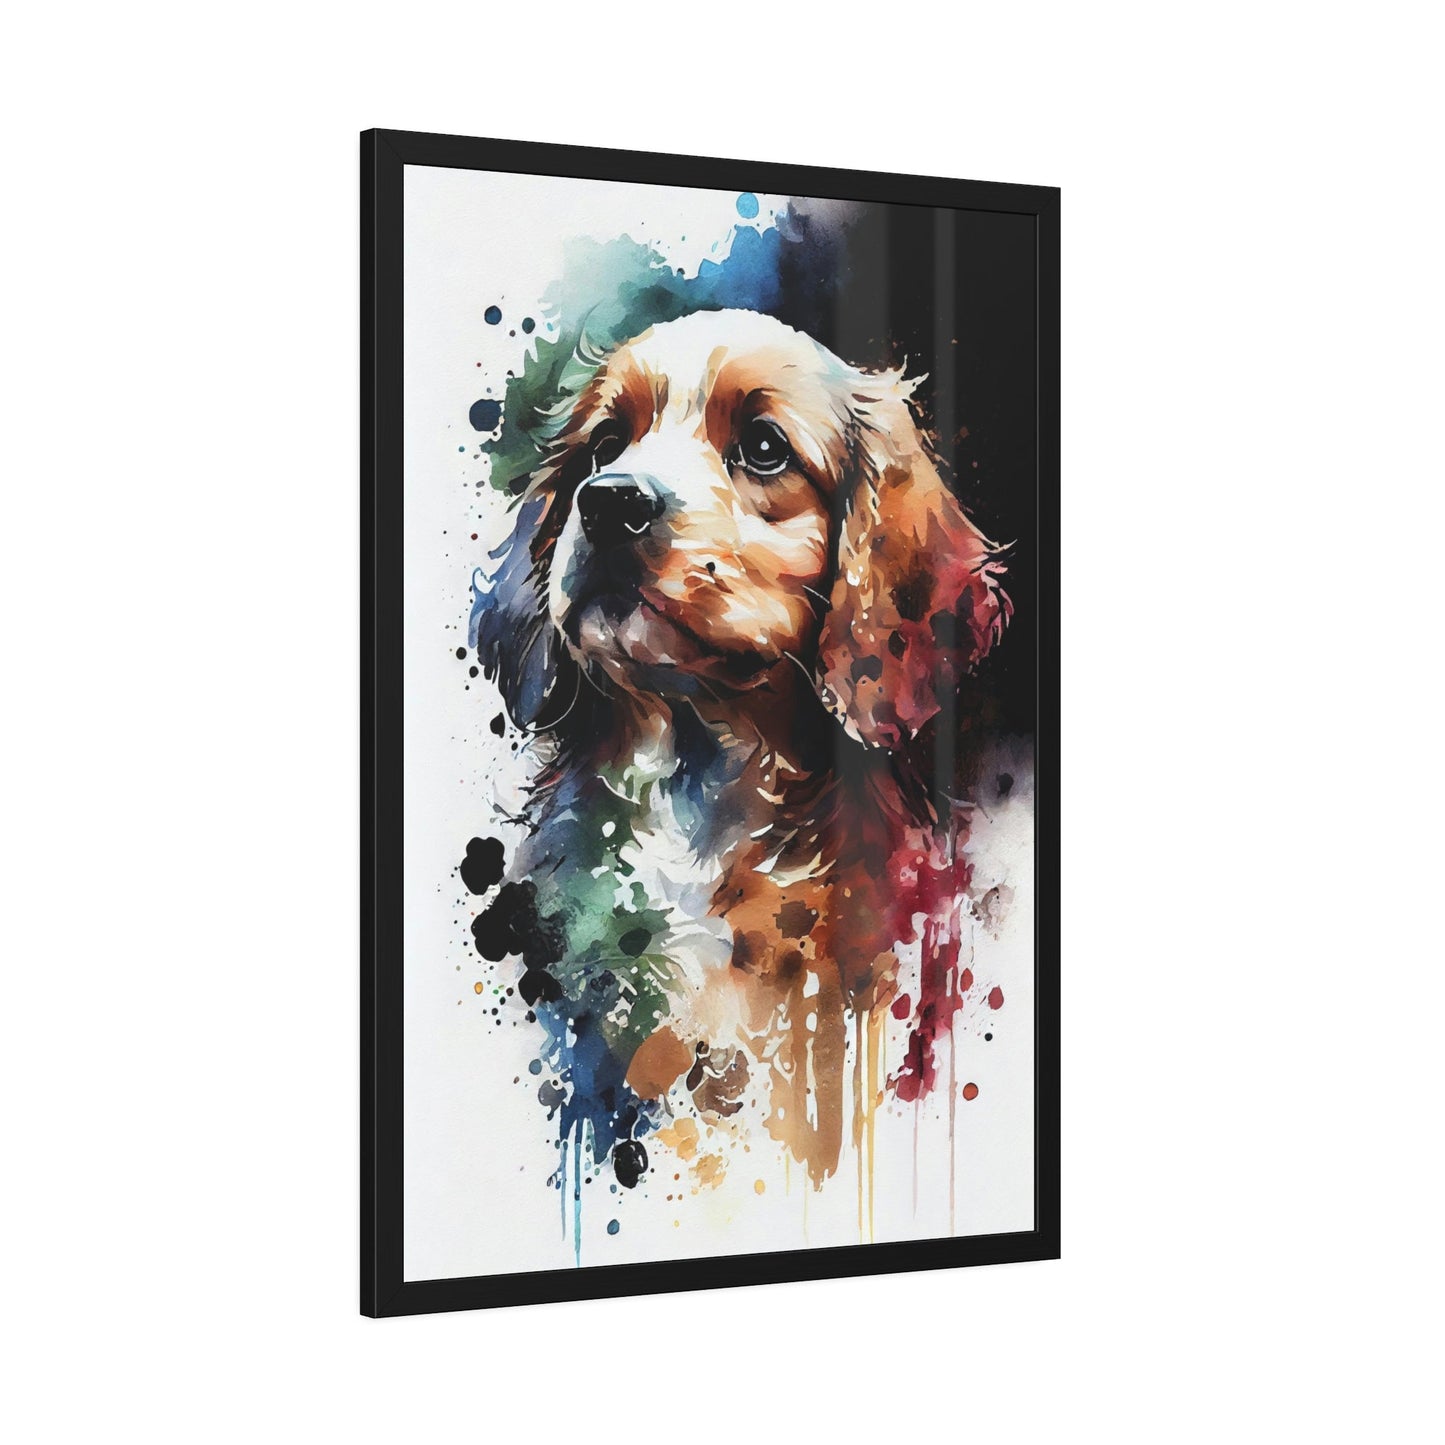 Framed Furry Friend: Print on Canvas of an Adorable Pup